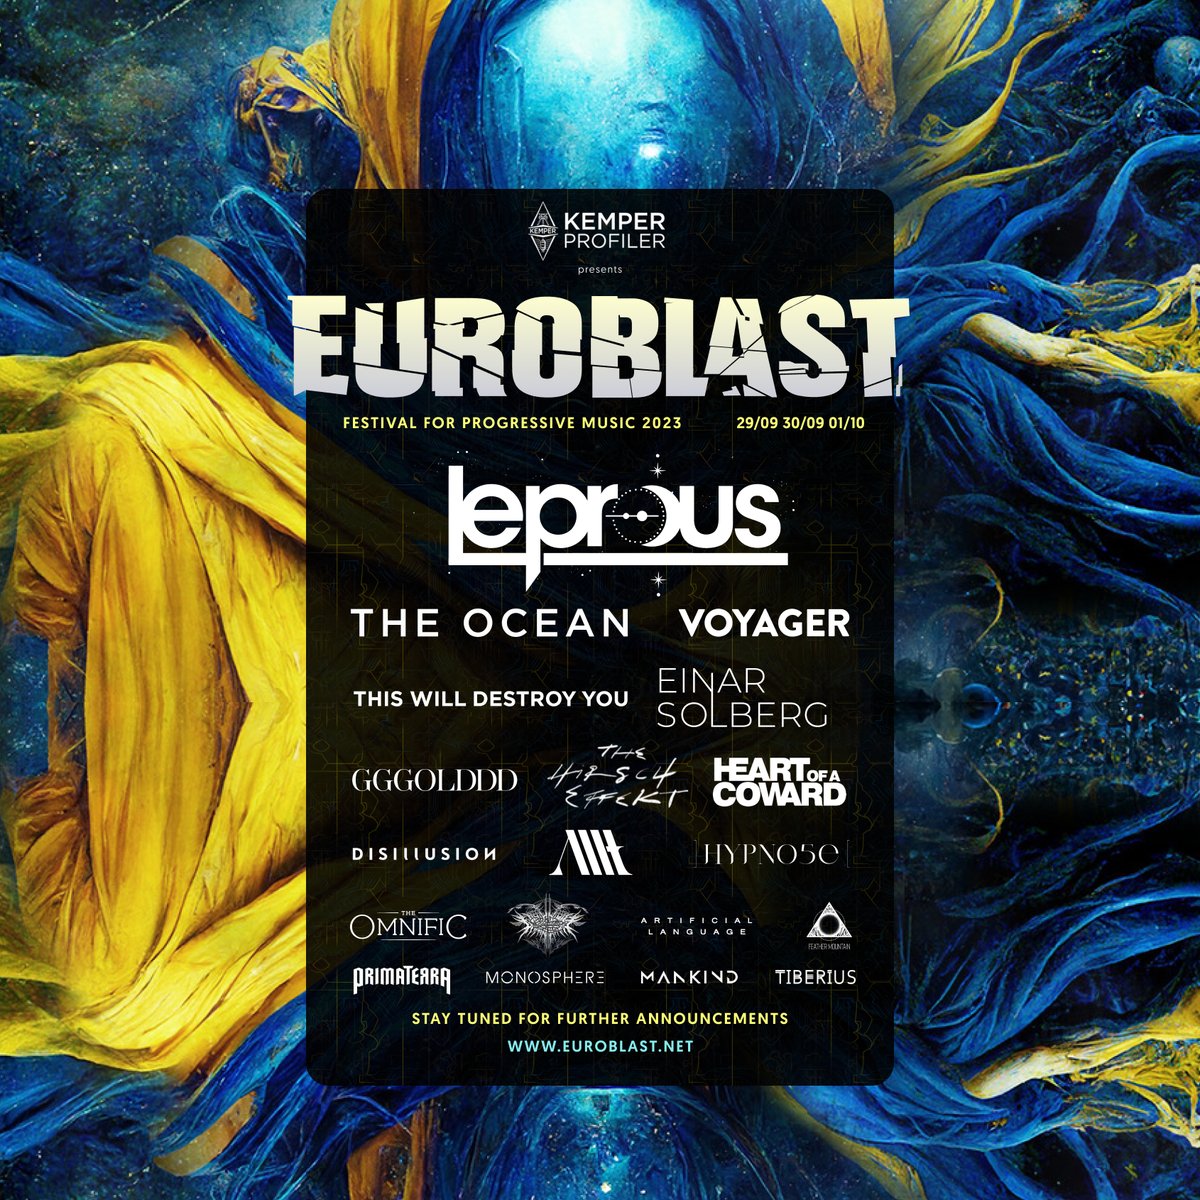 Euroblast Festival's first wave of bands is here, including: 

@leprousband 
@OceanCollective 
@_TWDY_
Einar Solberg 
@GGGOLDDDband 

🎟 tickets.euroblast.net

#EuroblastFestival2023 #Euroblast